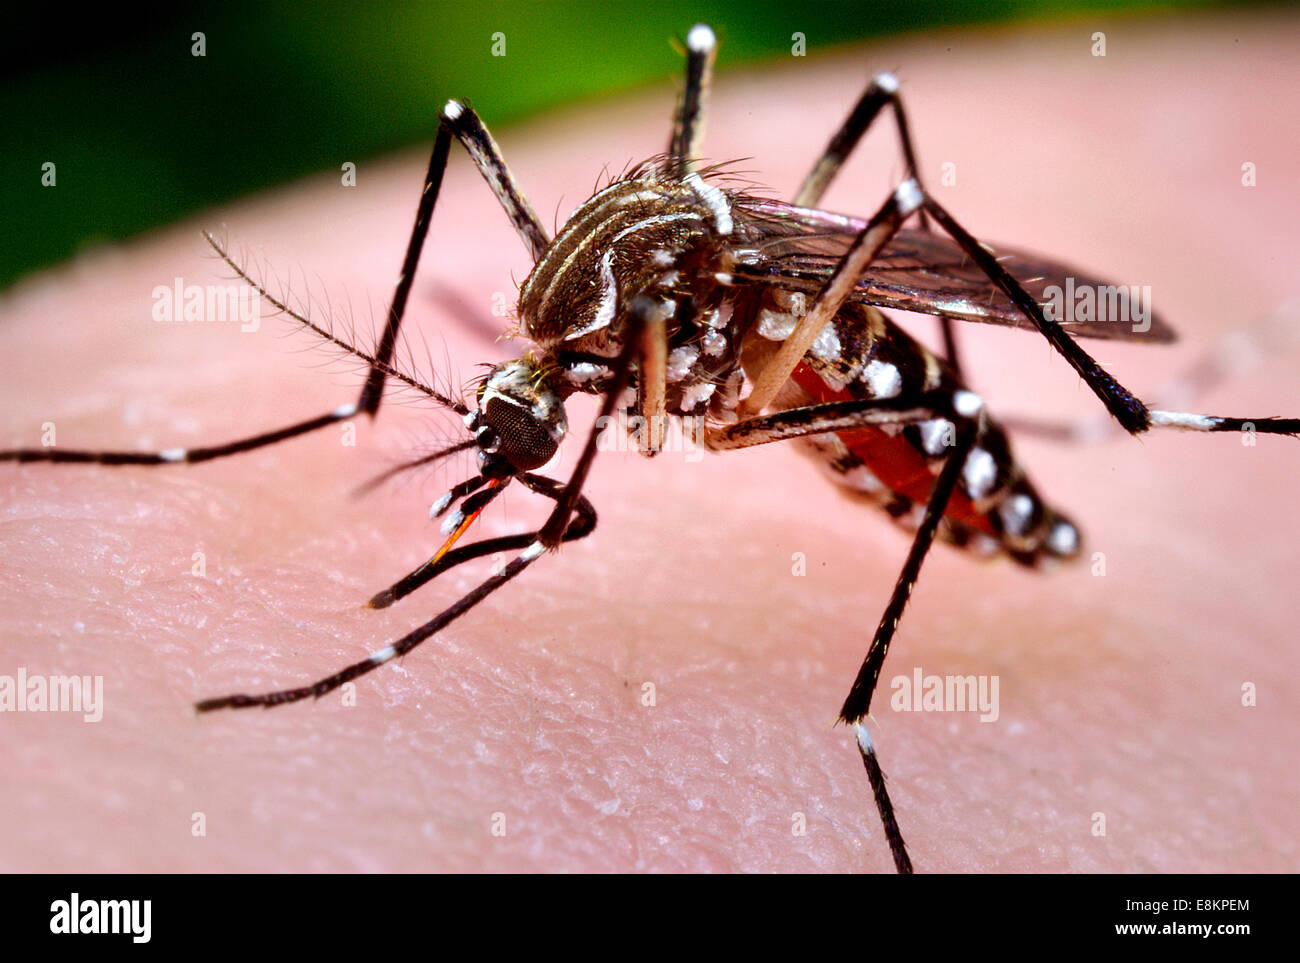 This photograph depicted female Aedes aegypti mosquito while she was in process of acquiring blood meal from her human host, Stock Photo